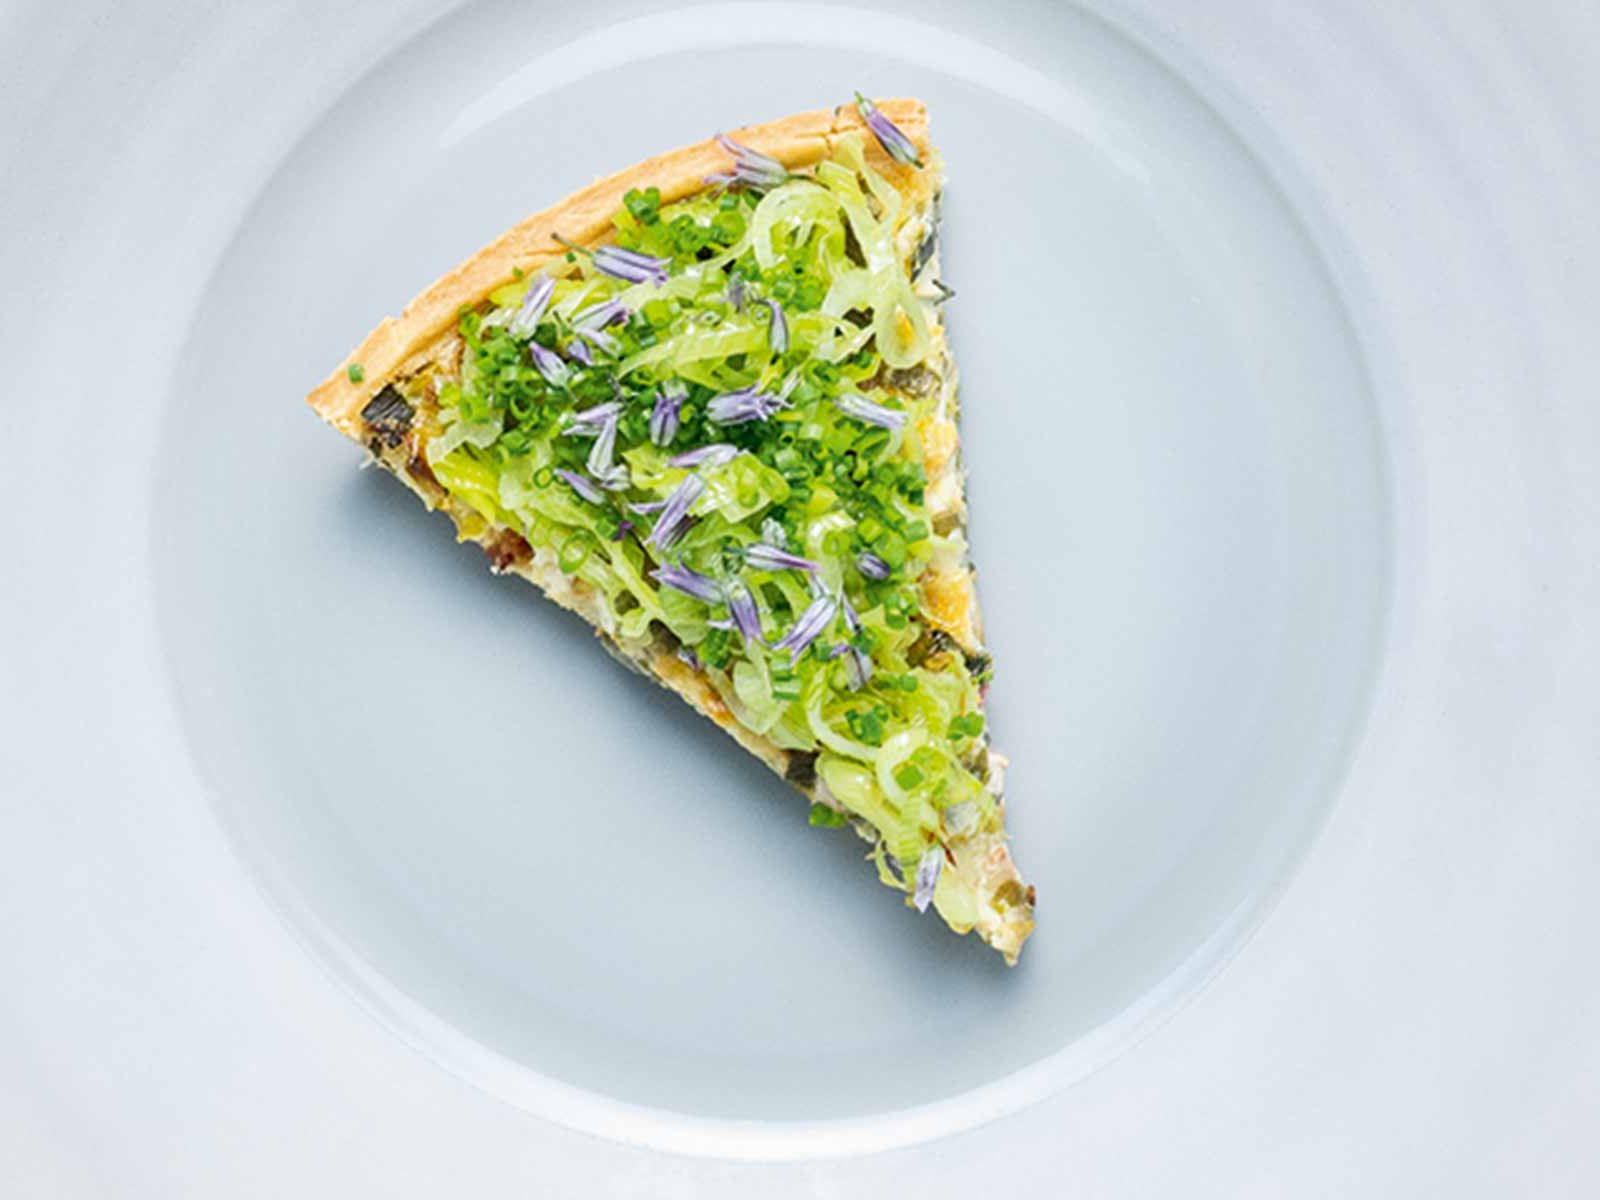 Leek Quiche with Chives